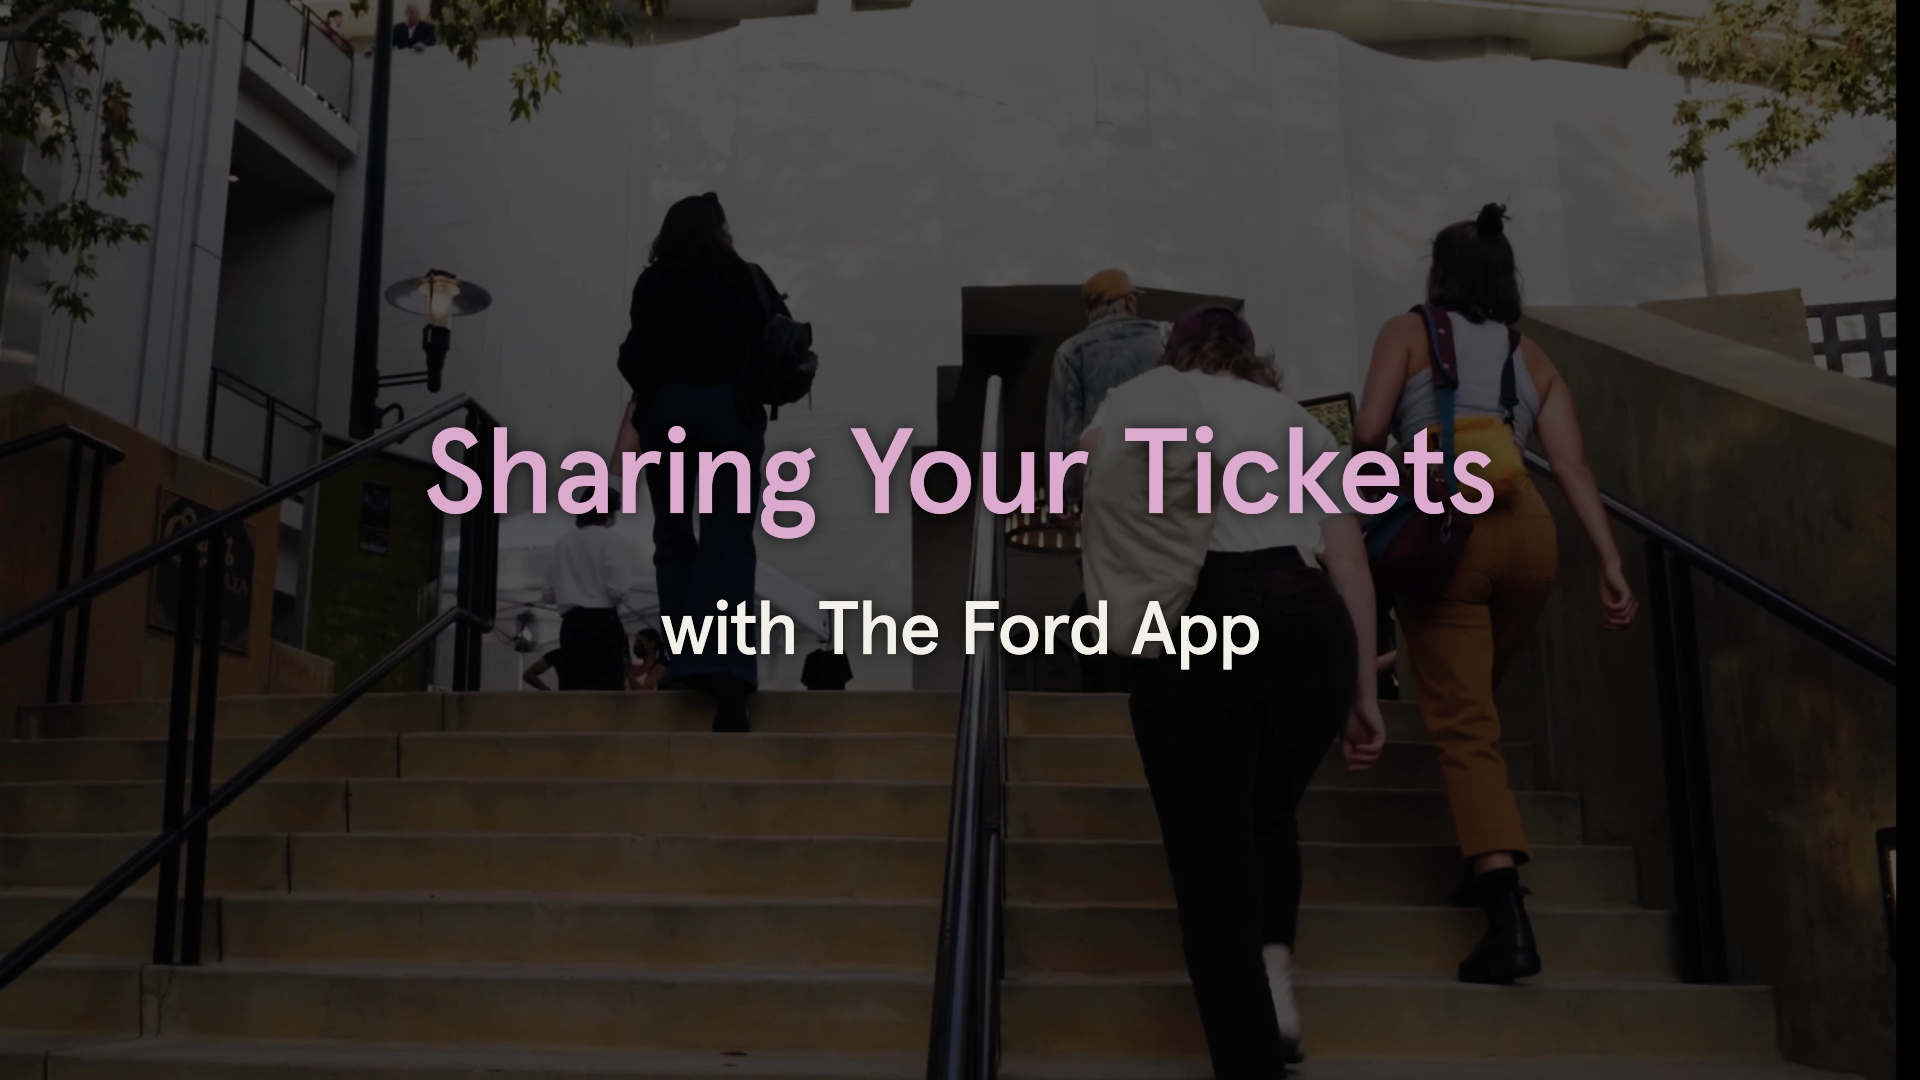 Video about Sharing Your Tickets on The Bowl App